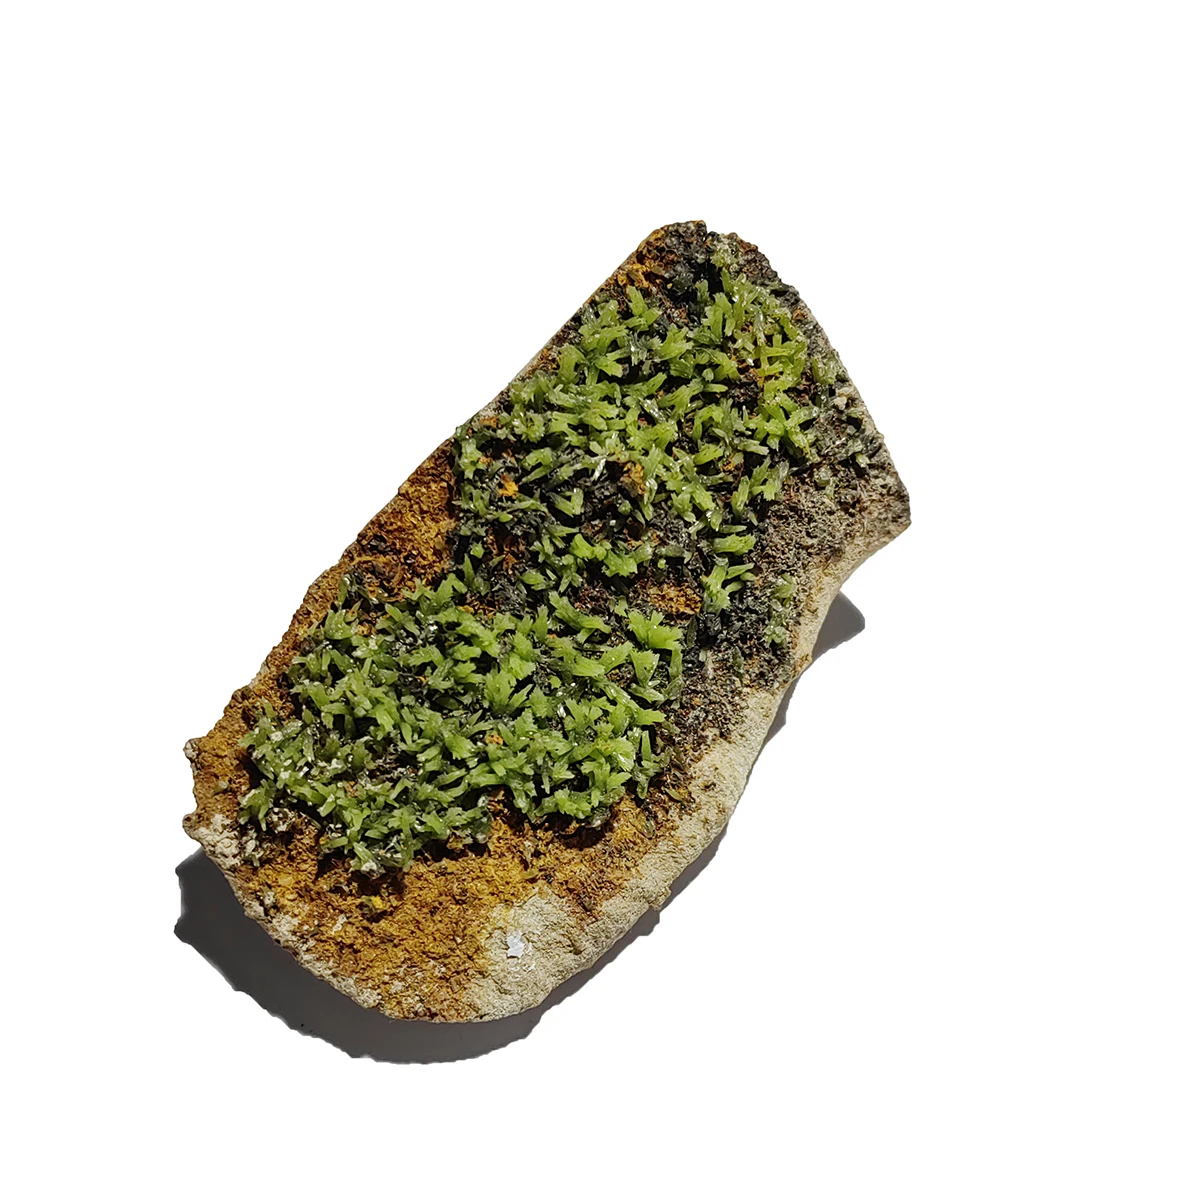 

1PCS 100% Natural Pyromorphite Mineral Crystal Teaching Specimen Collect Home Decoration Trinkets Room Decor